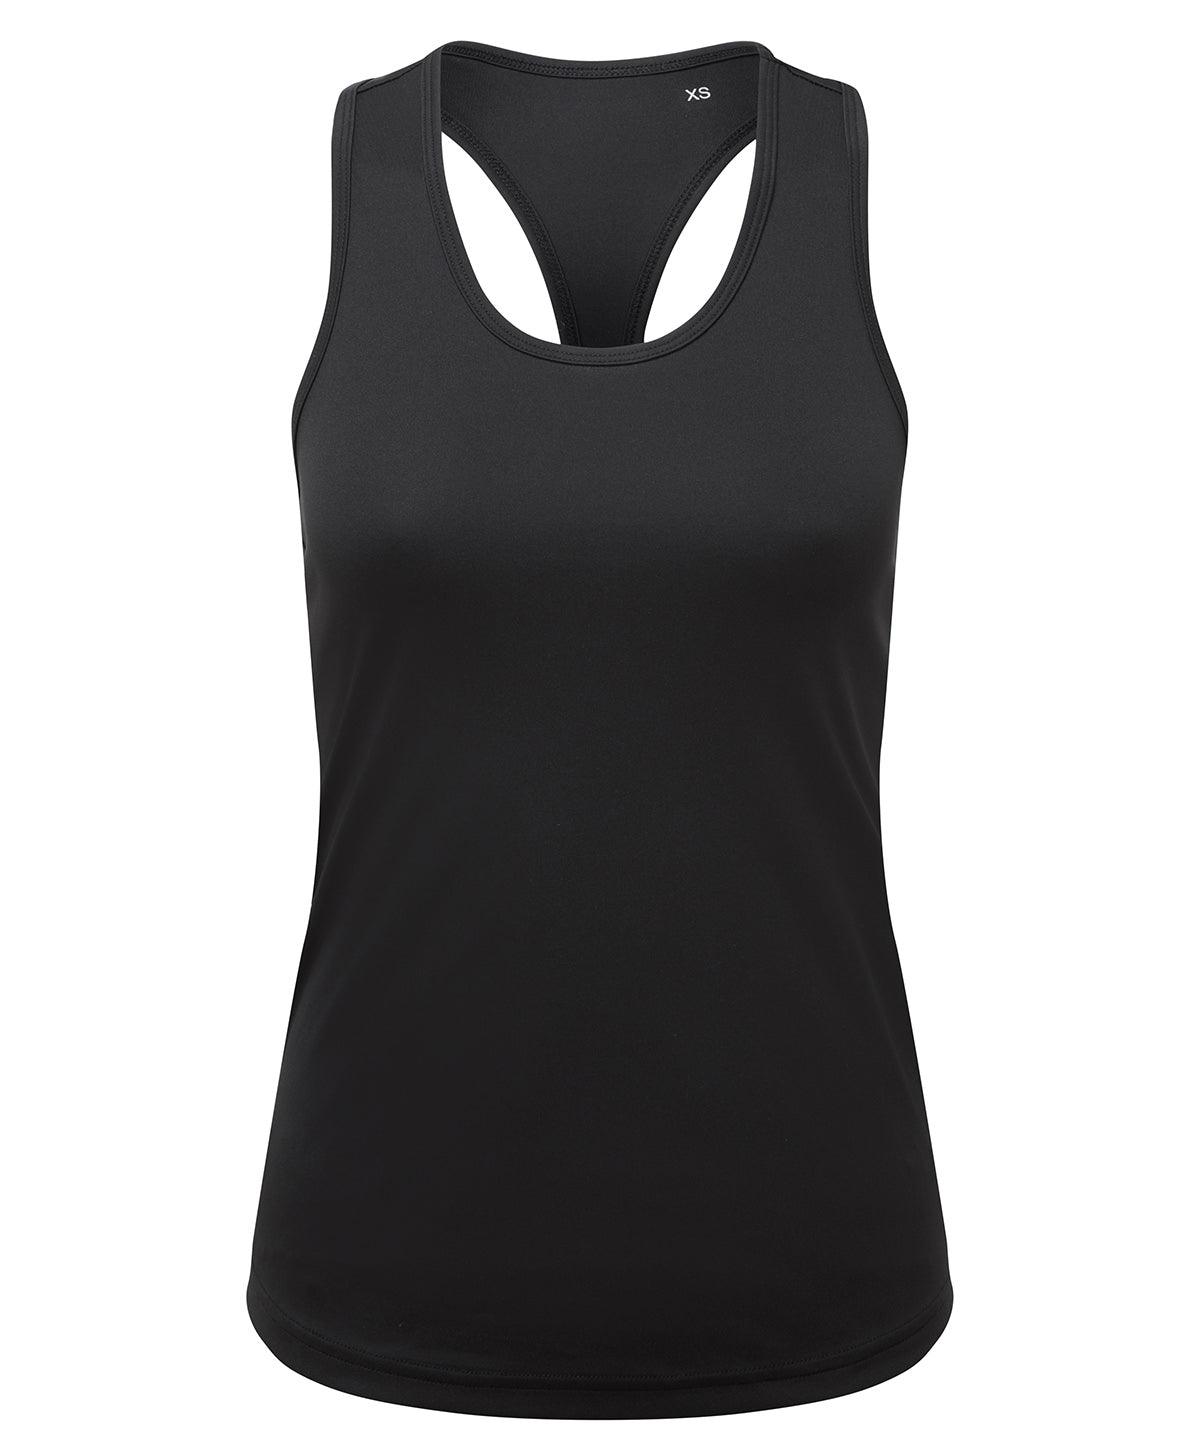 Black - Women’s TriDri® recycled performance slim racerback vest Vests TriDri® Activewear & Performance, Back to the Gym, Exclusives, New Styles For 2022, Organic & Conscious, Women's Fashion Schoolwear Centres